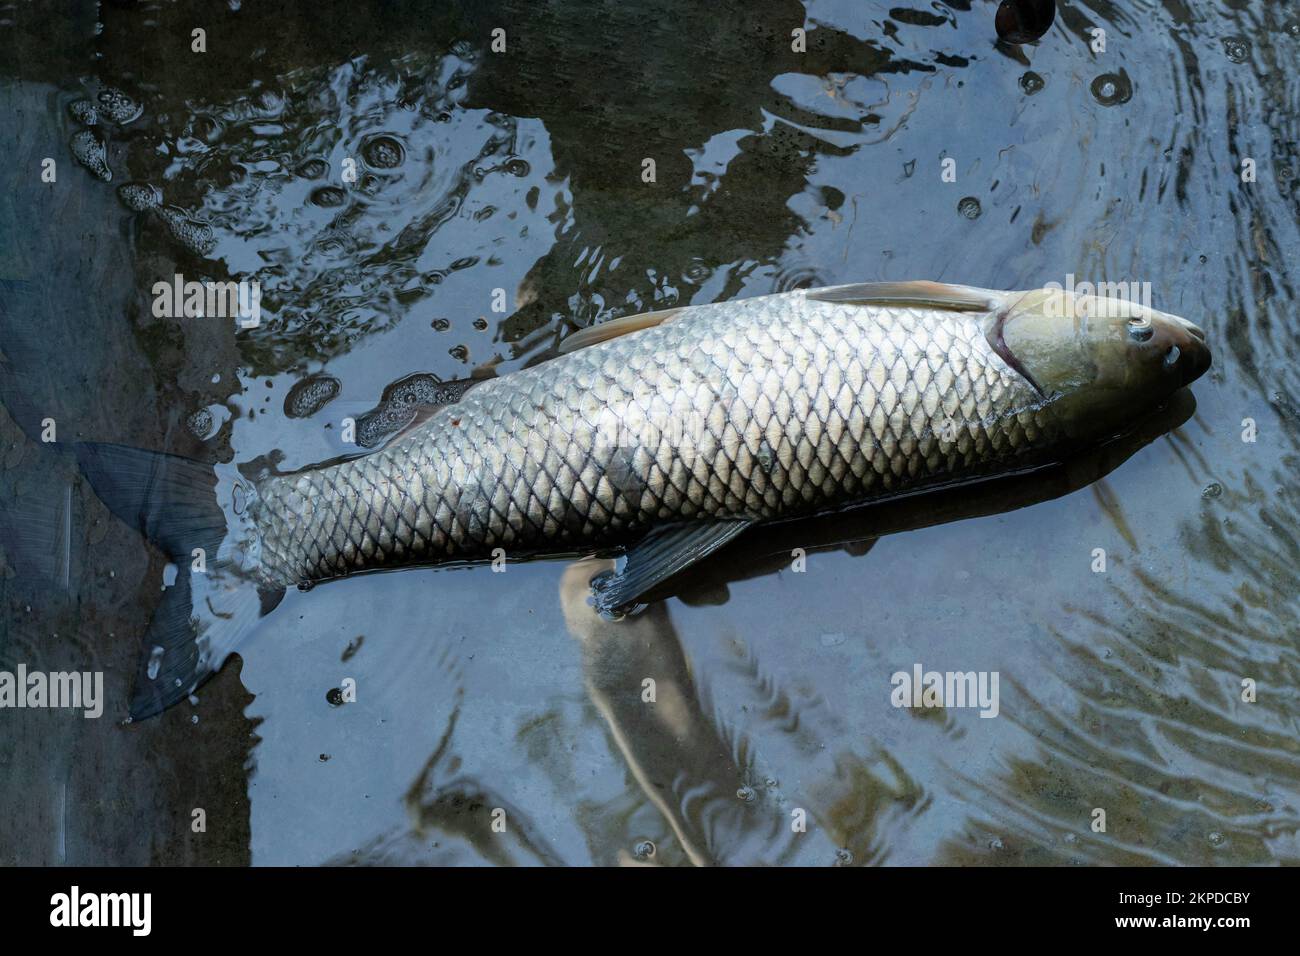 The Big Grass Carp is a herbivorous freshwater fish belonging to the family Cyprinidae and the only species of its biological genus Ctenopharyngodon Stock Photo